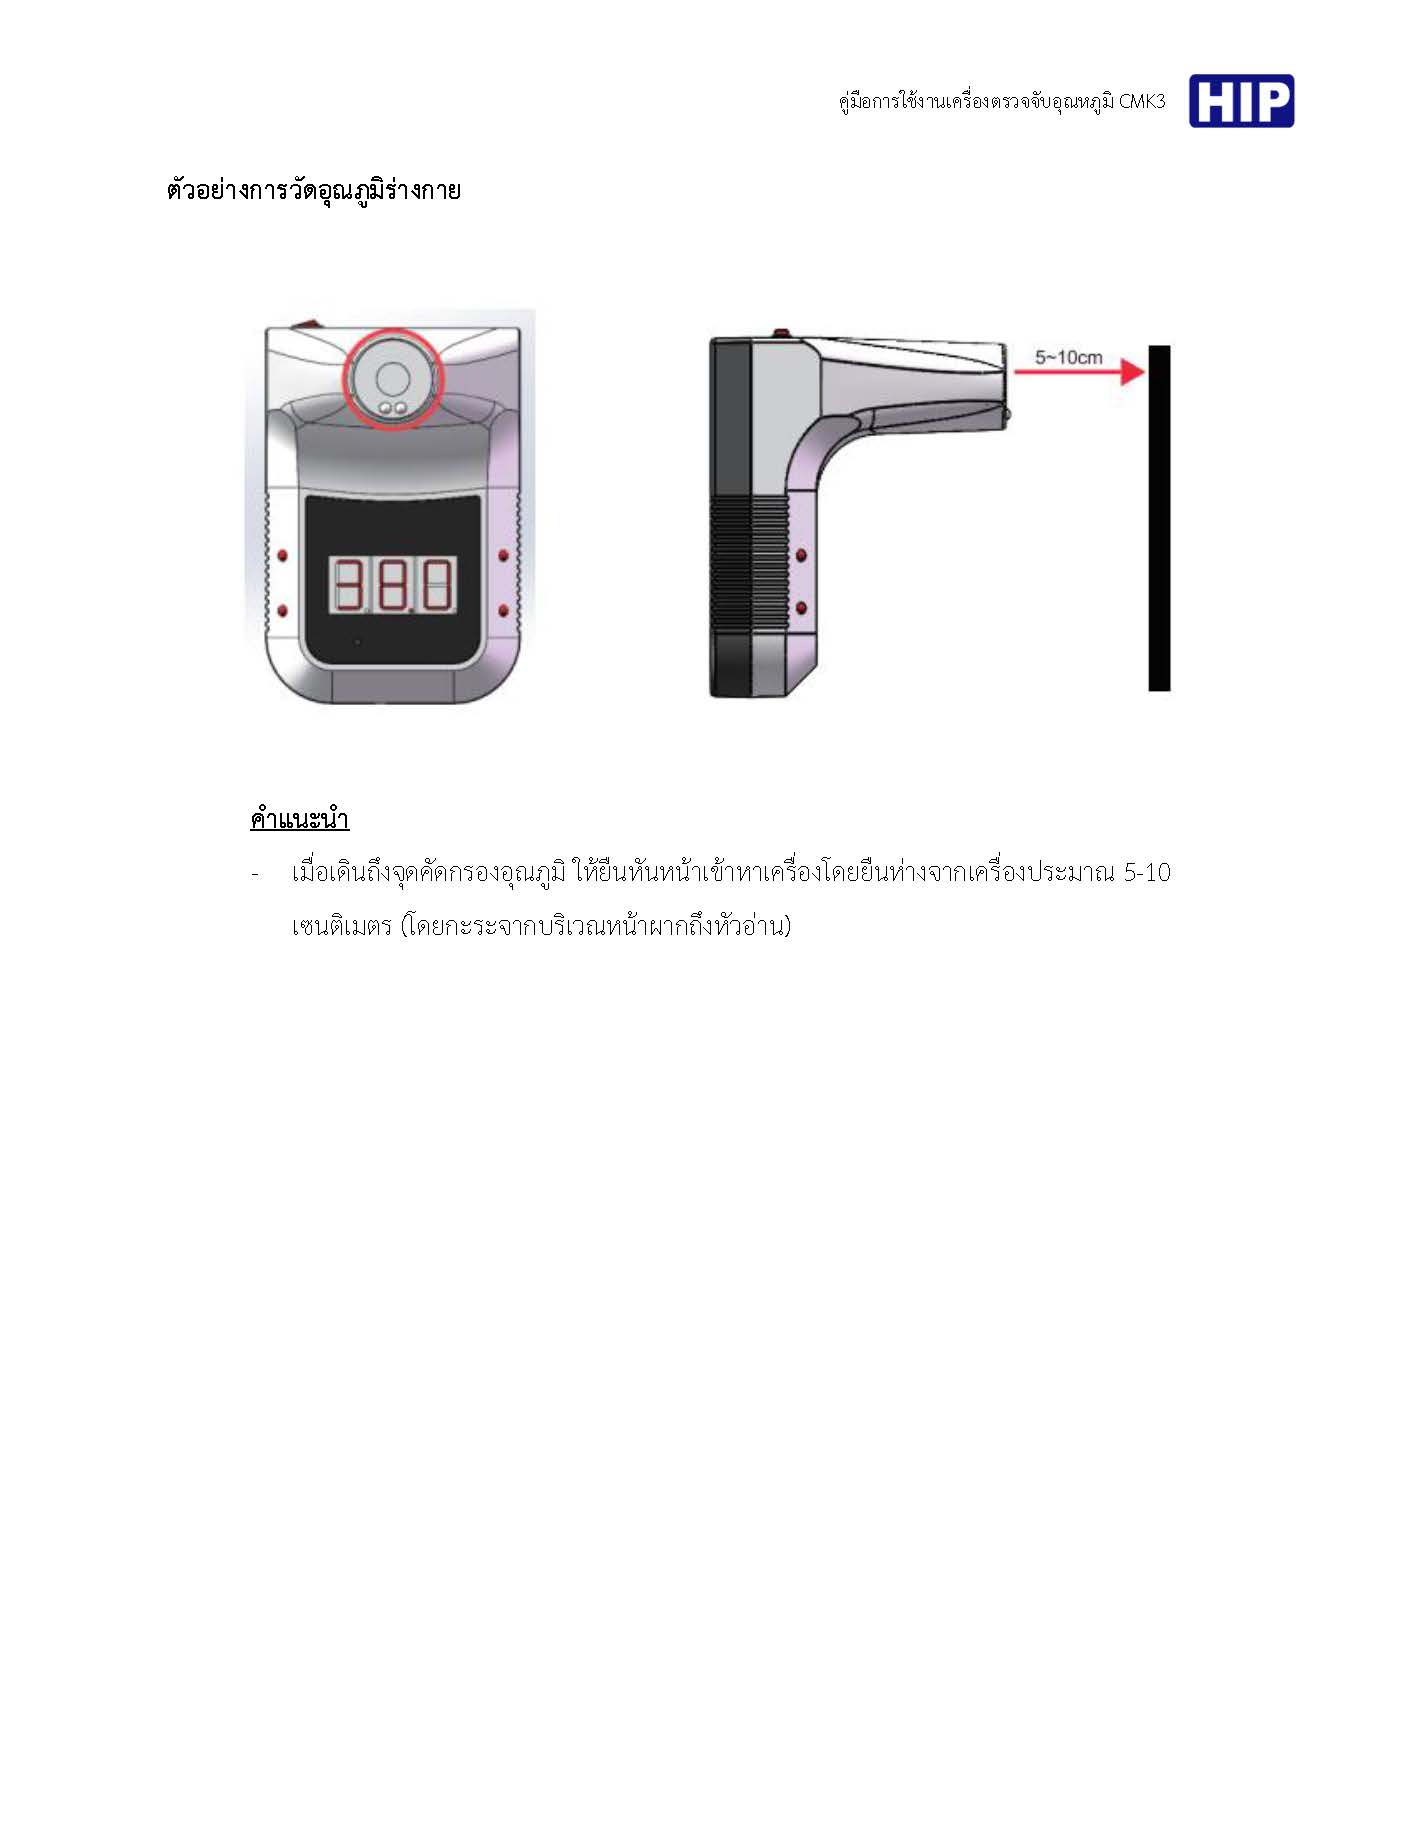 Infrared Thermometer For Head CMK3